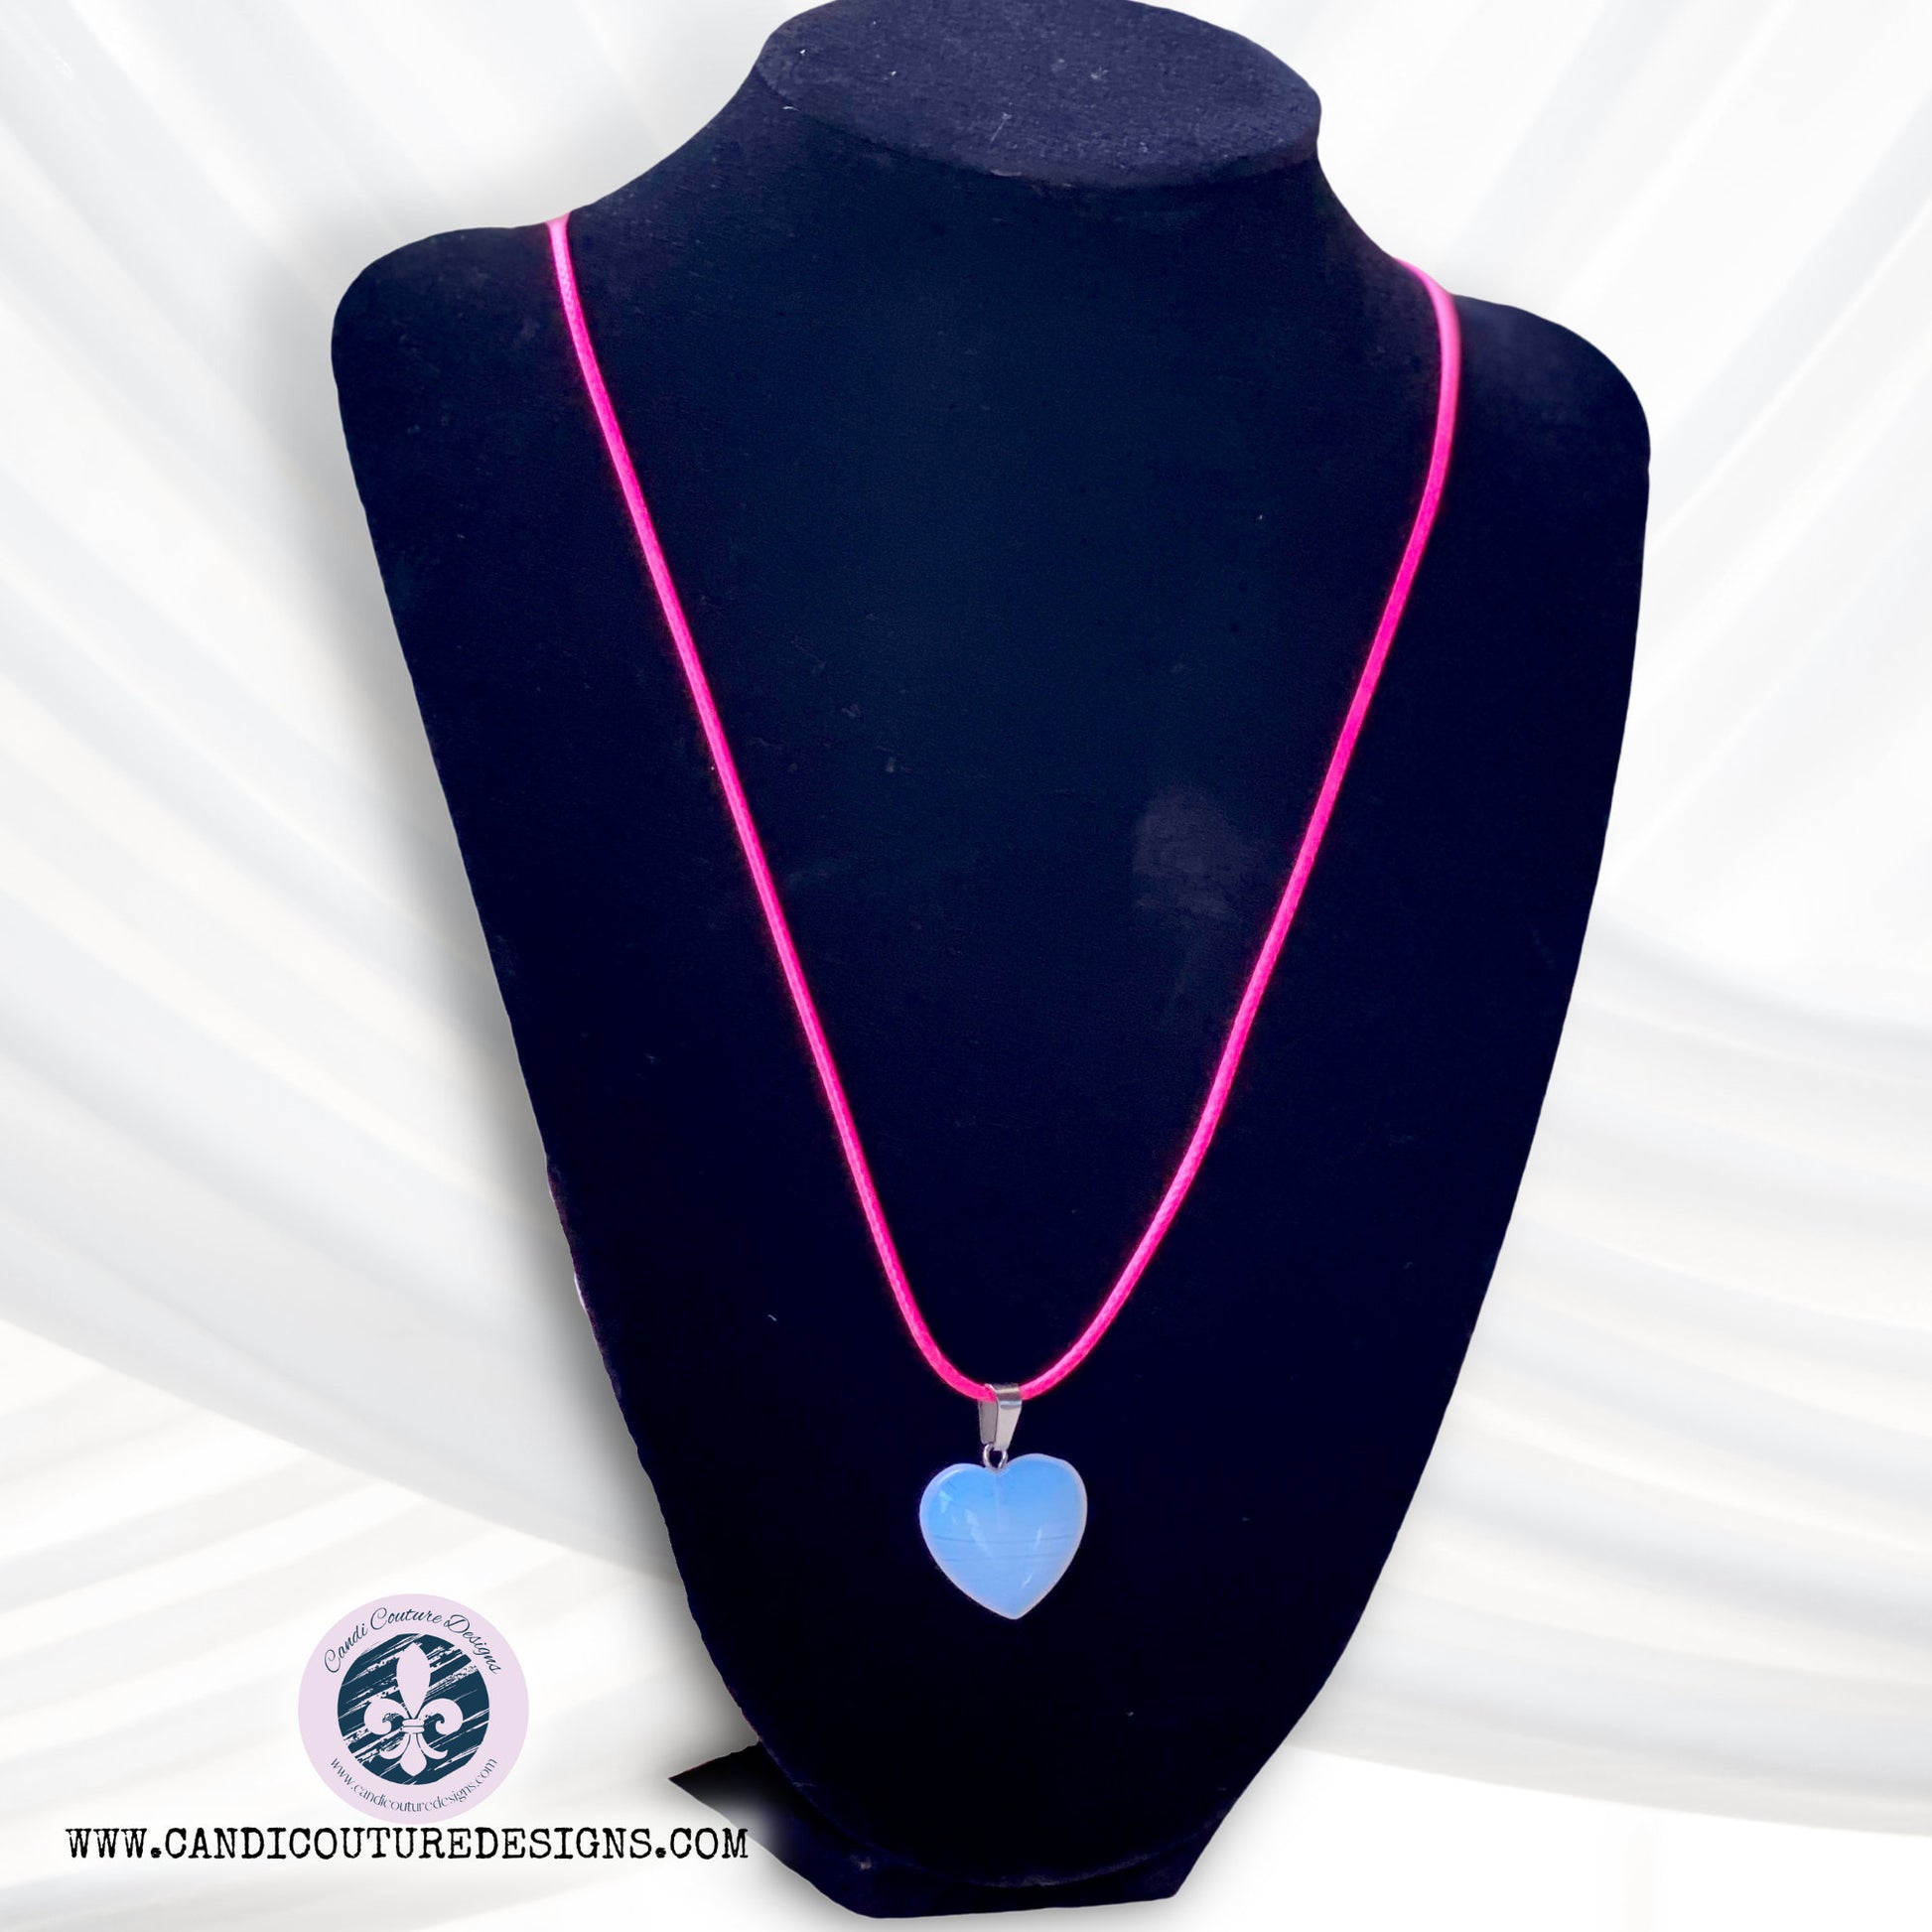 Heart pendant necklace with waxed cord